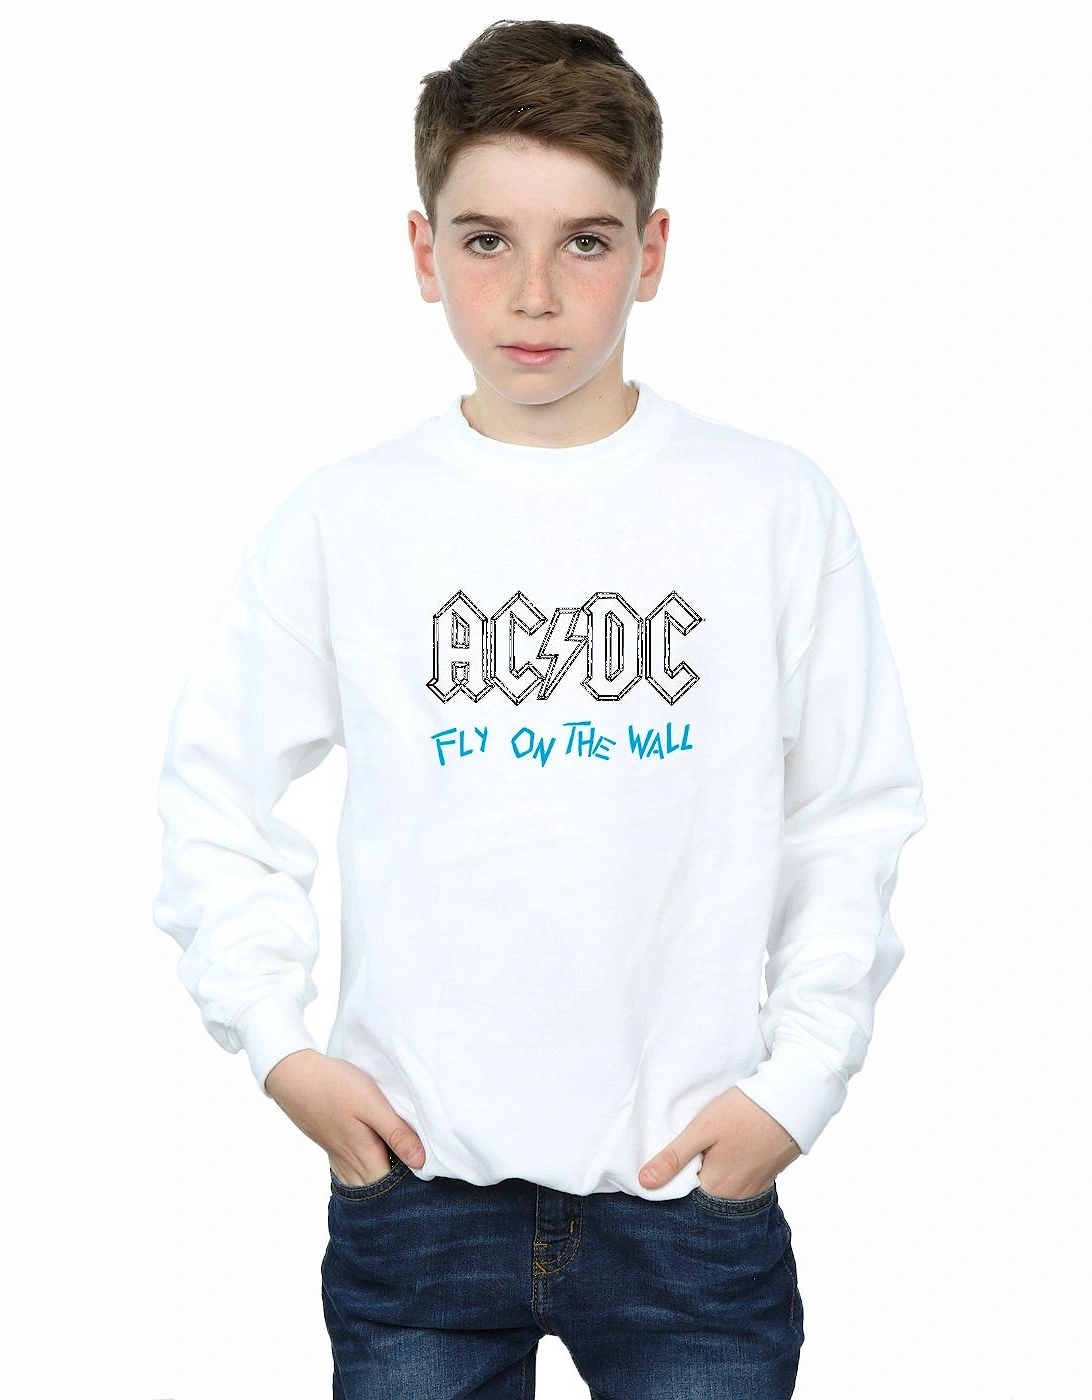 Boys Fly On The Wall Outline Sweatshirt